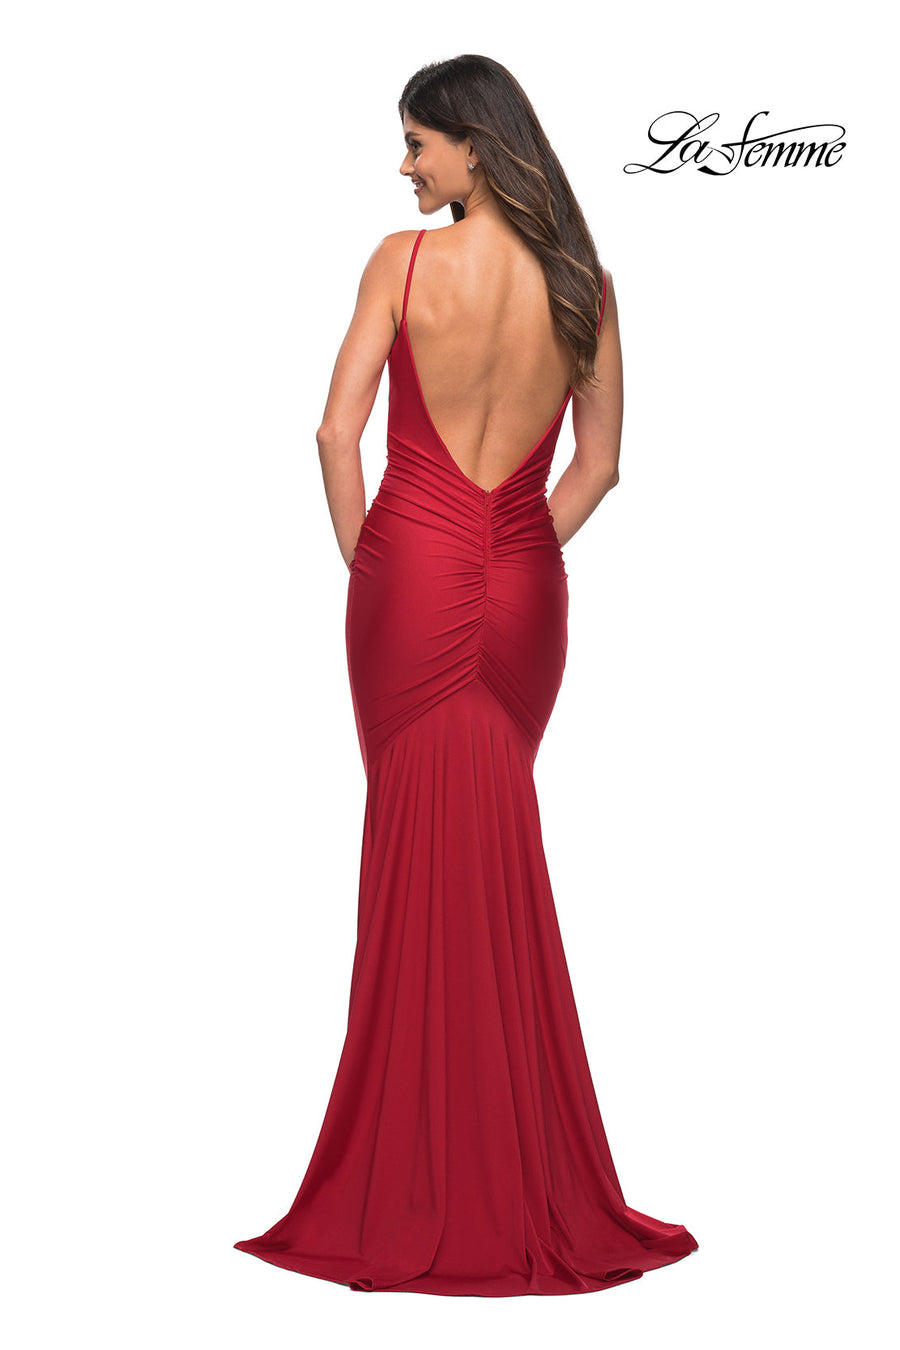 La Femme 30366 prom dress images.  La Femme 30366 is available in these colors: Black, Red.